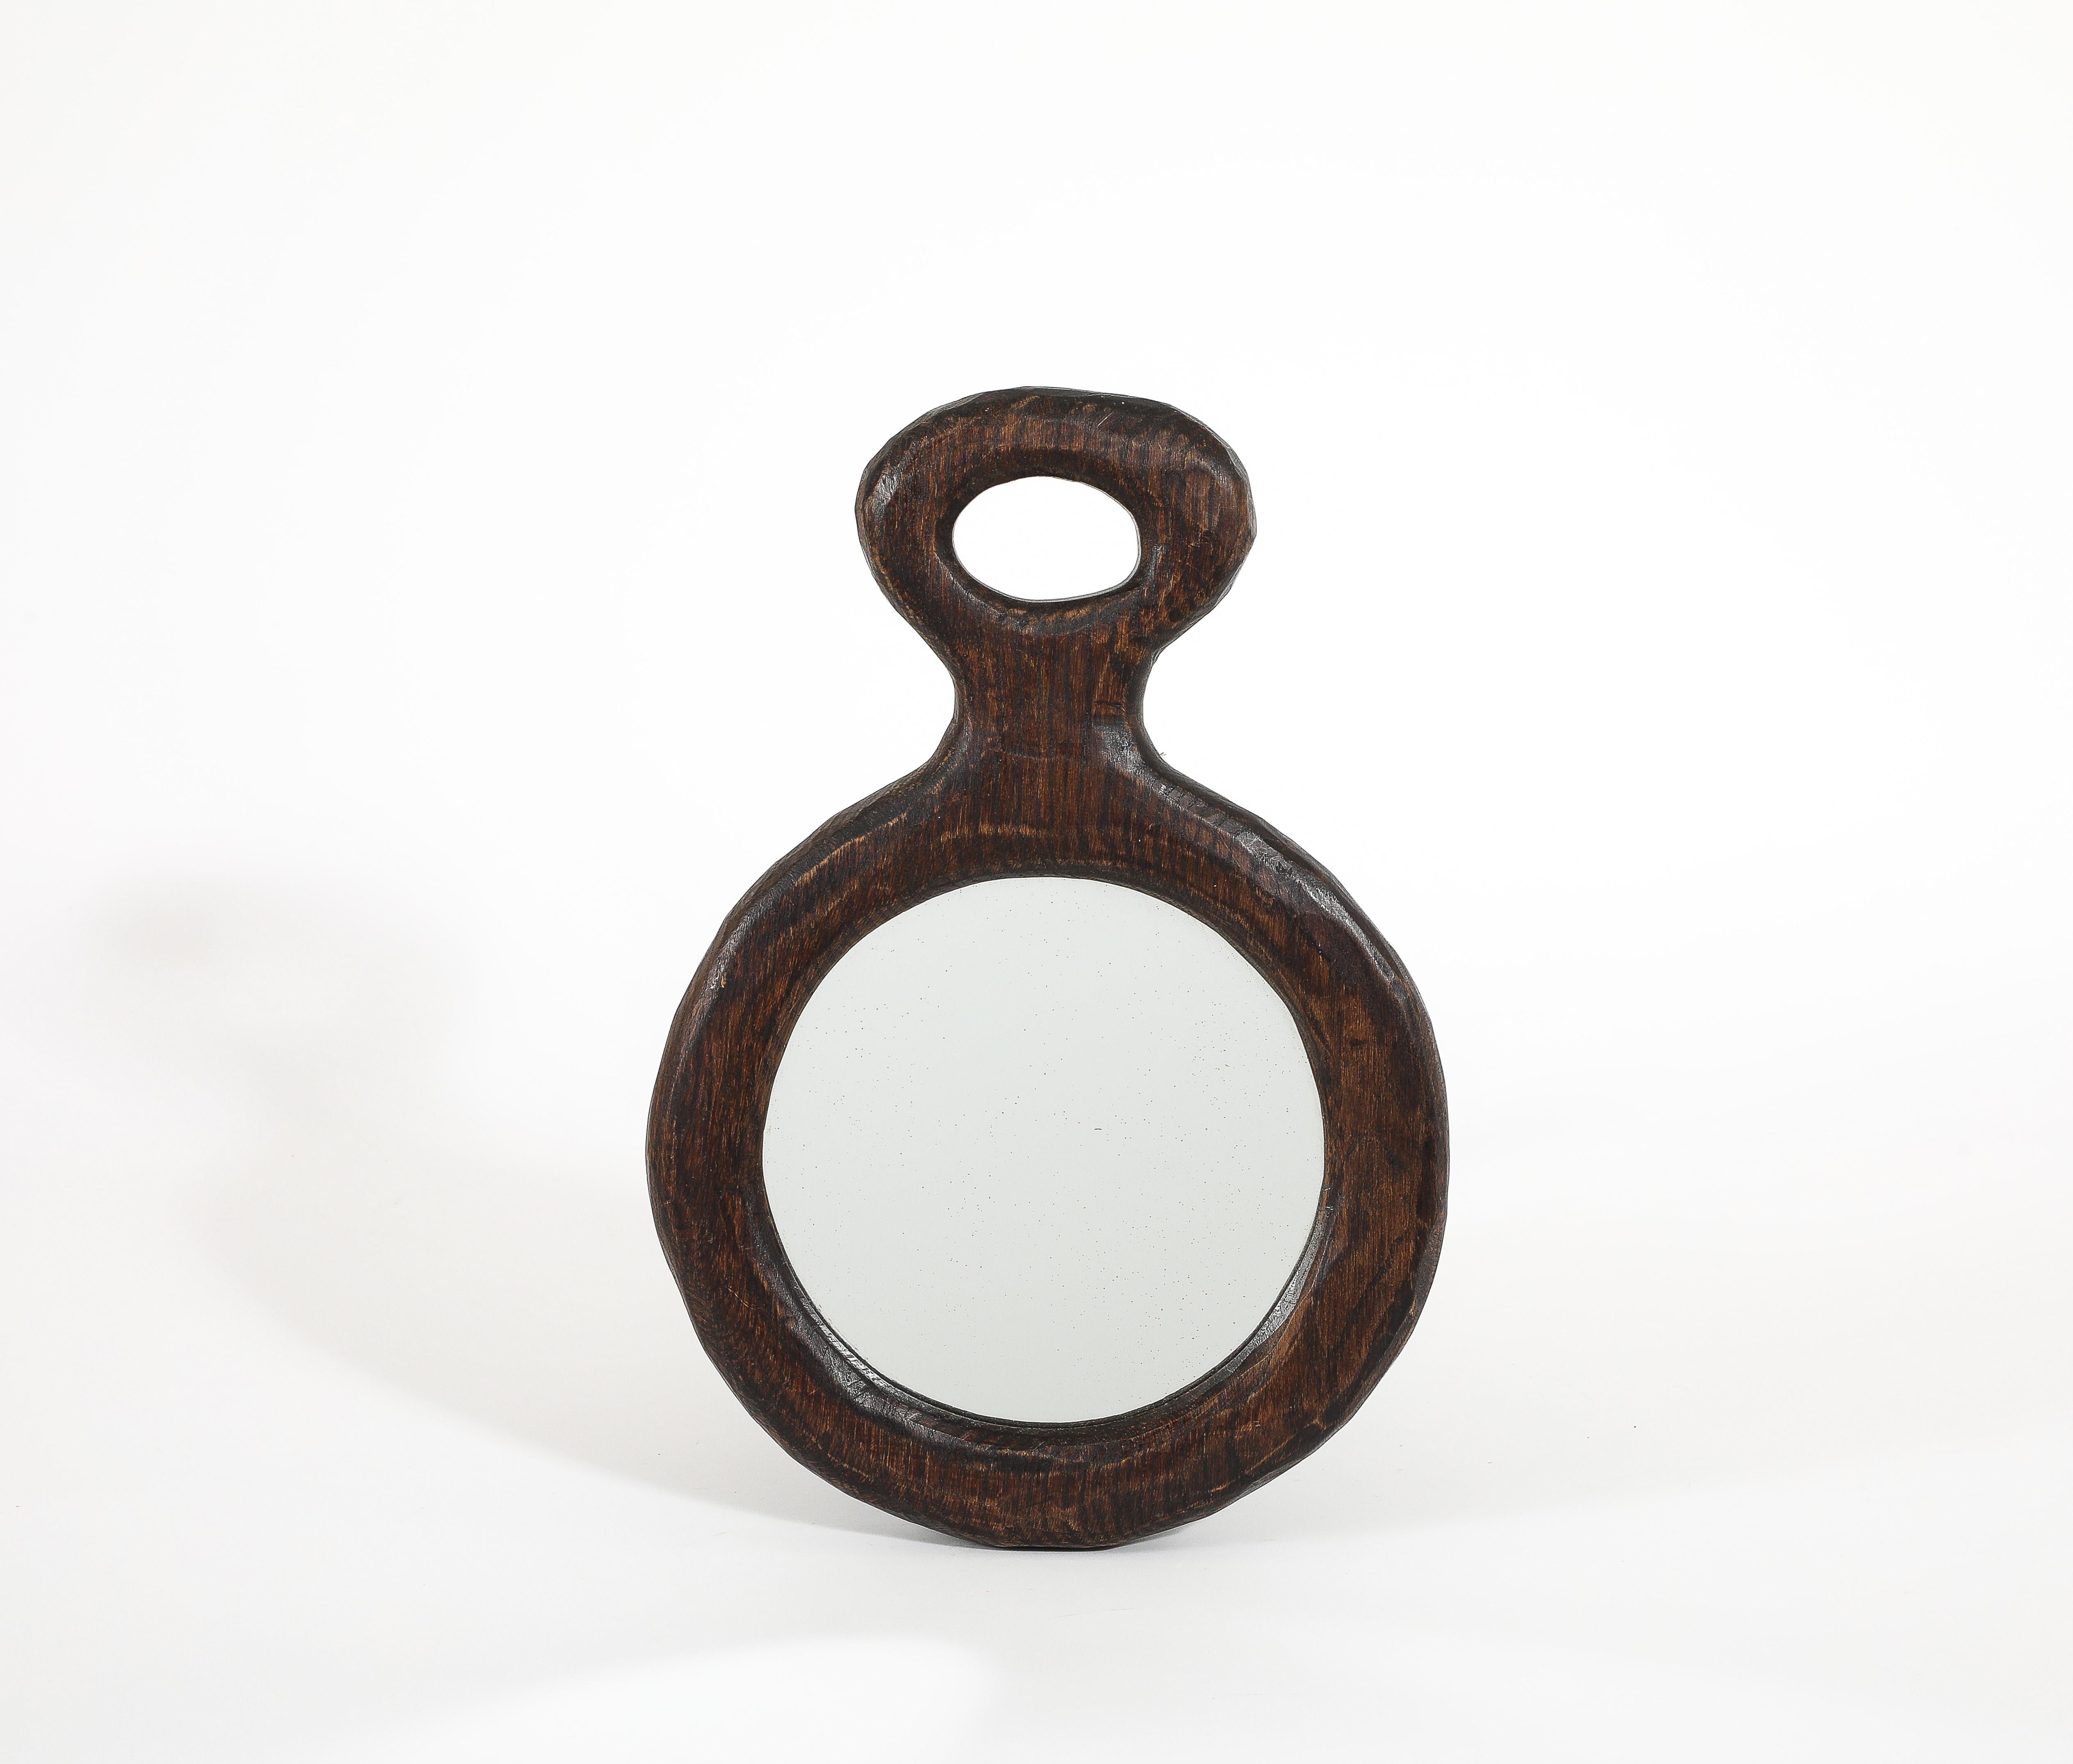 Solid carved mirror with a stylized handle.
